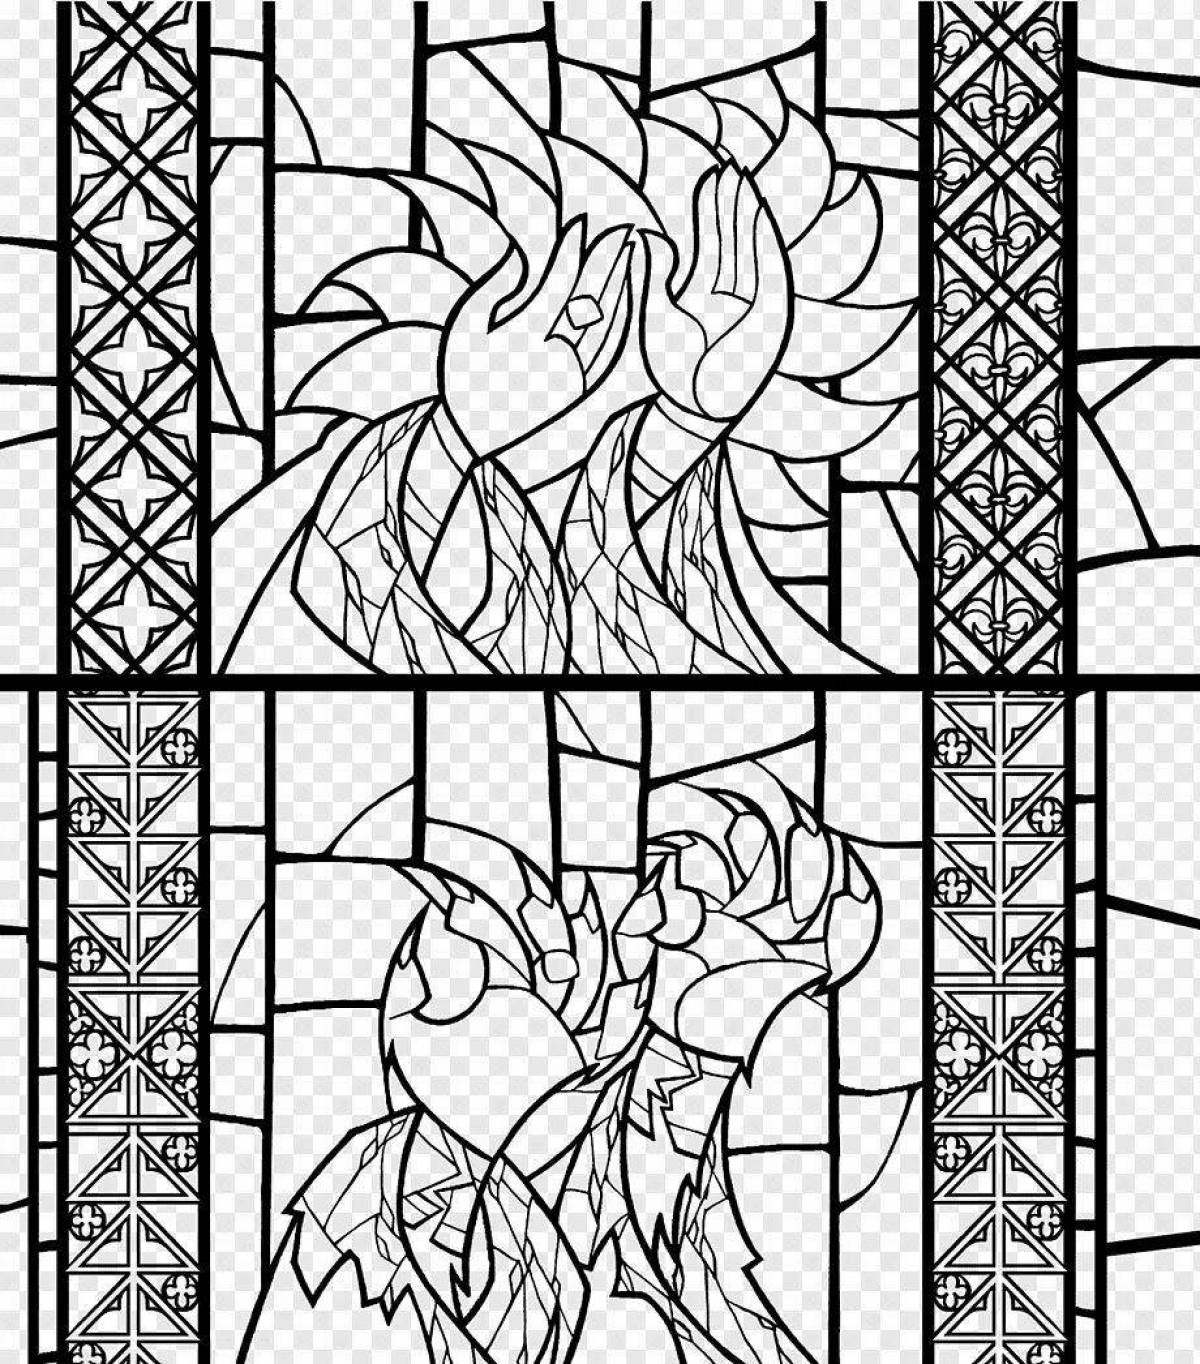 Coloring page charming stained glass windows